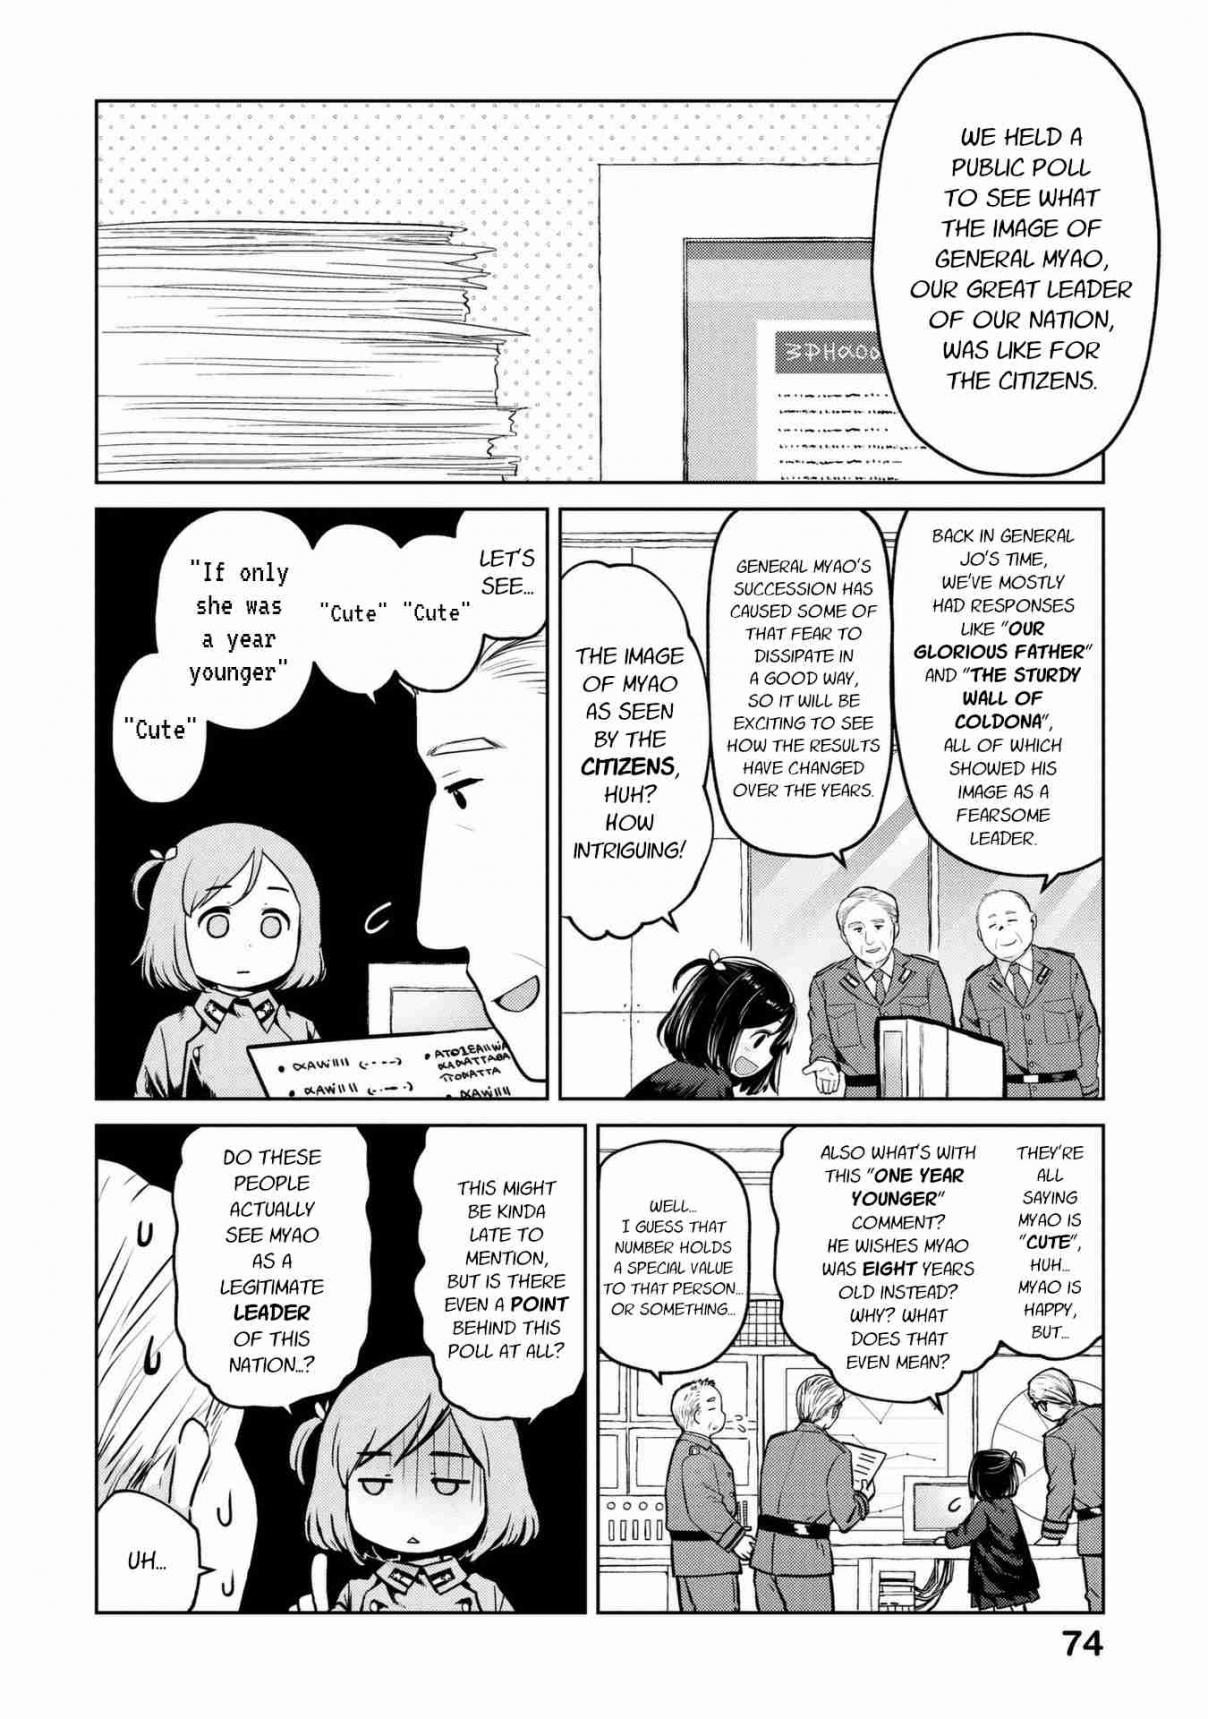 Oh, Our General Myao Vol. 1 Ch. 8 In Which Myao Holds a Public Poll